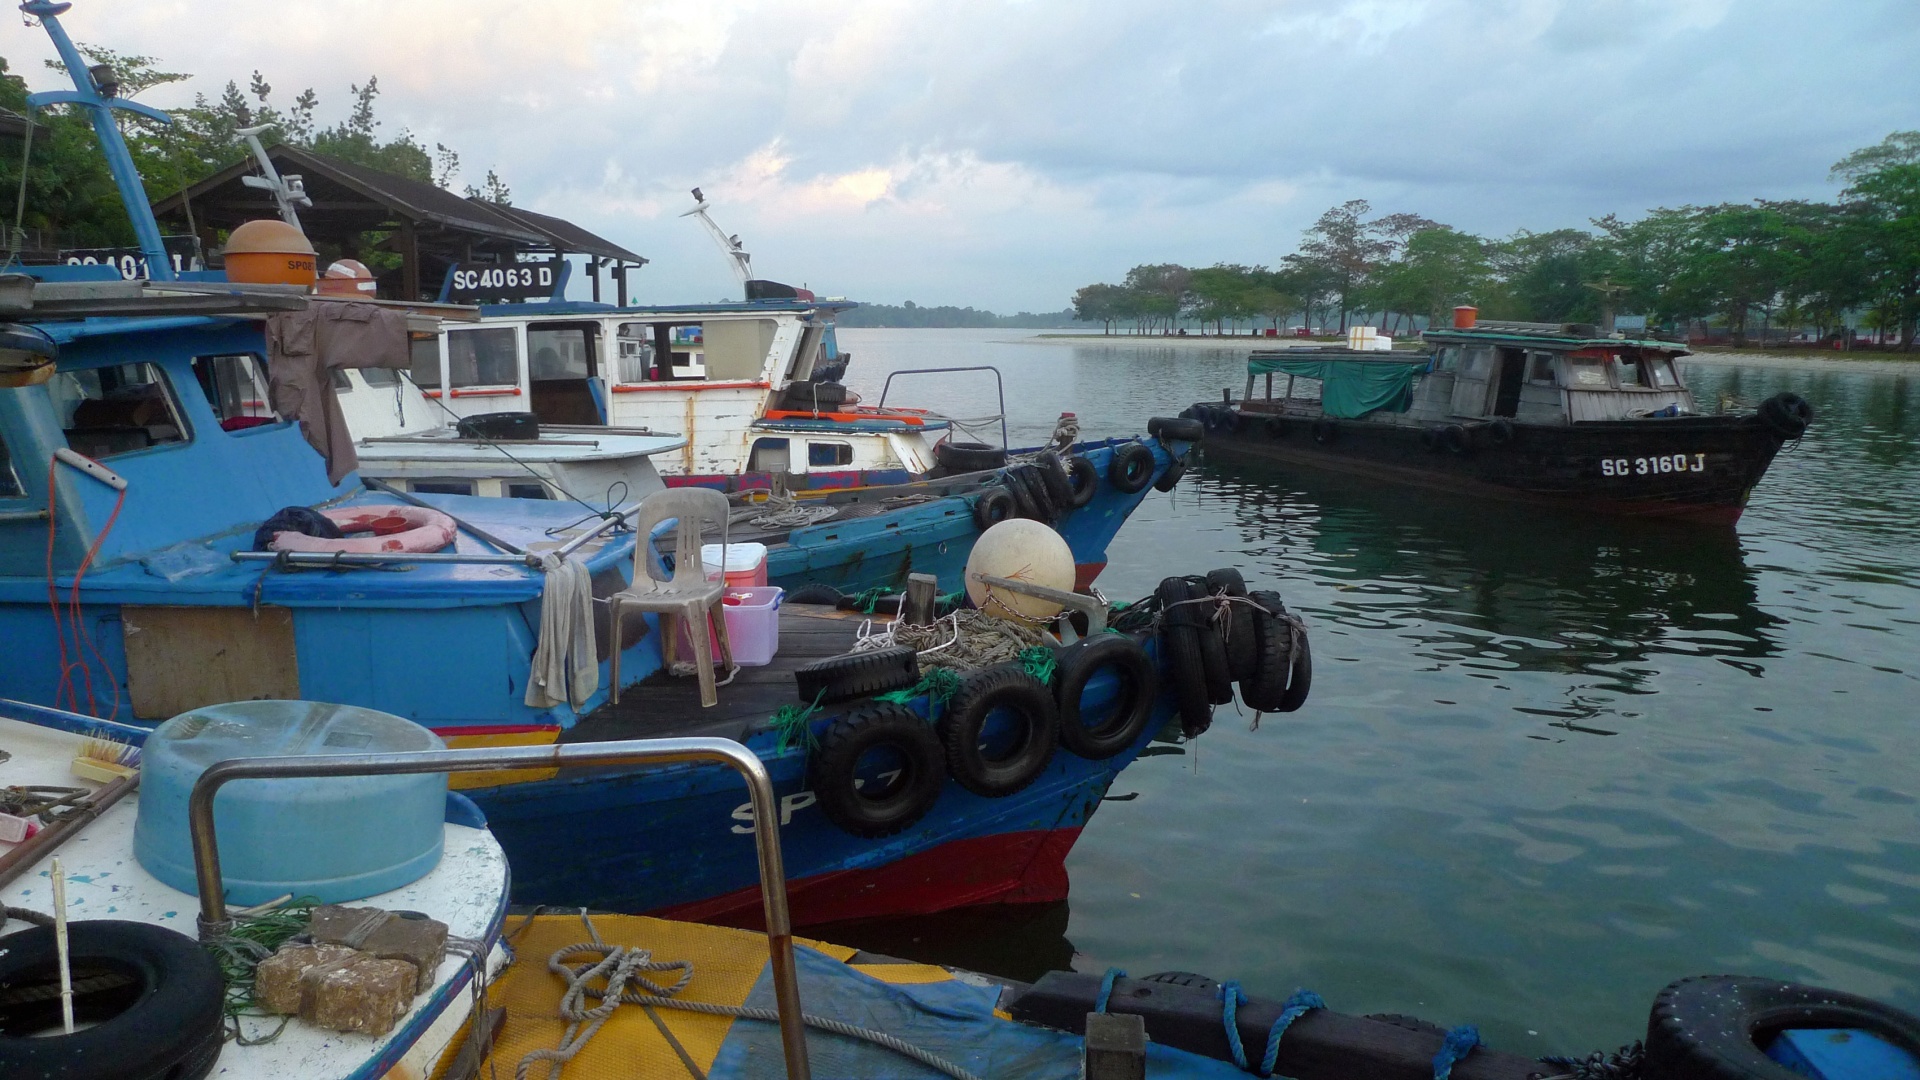 Boats at Changi Point Ferry Terminal on the north-east coast of Singapore Island. Boats from here sail to Ubin Island and locations in Johor state, Malaysia